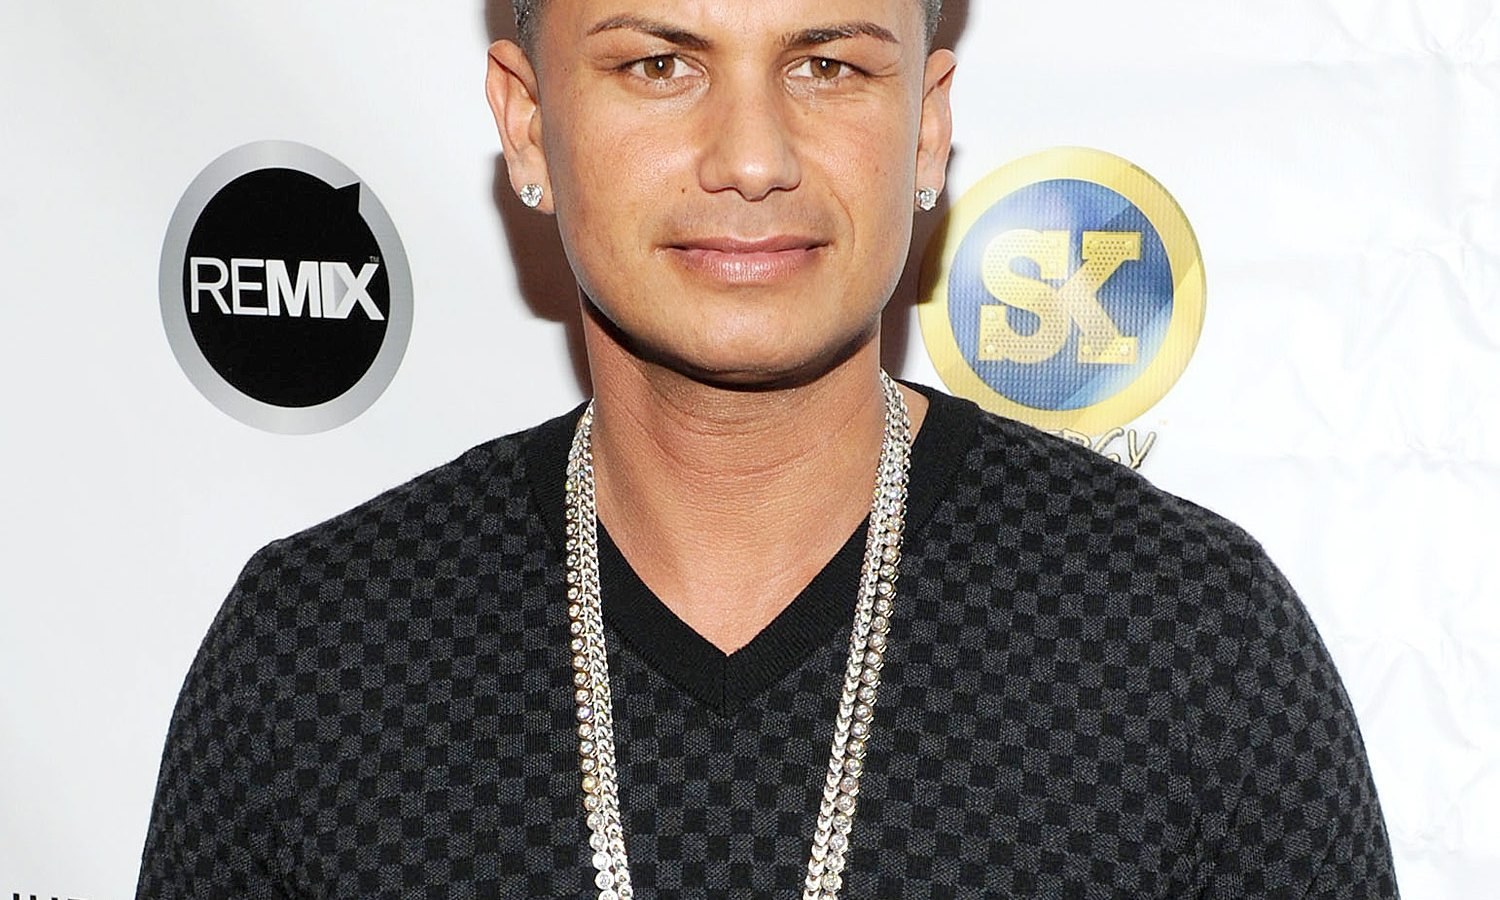 DJ Pauly D on May 23, 2013 in New York City